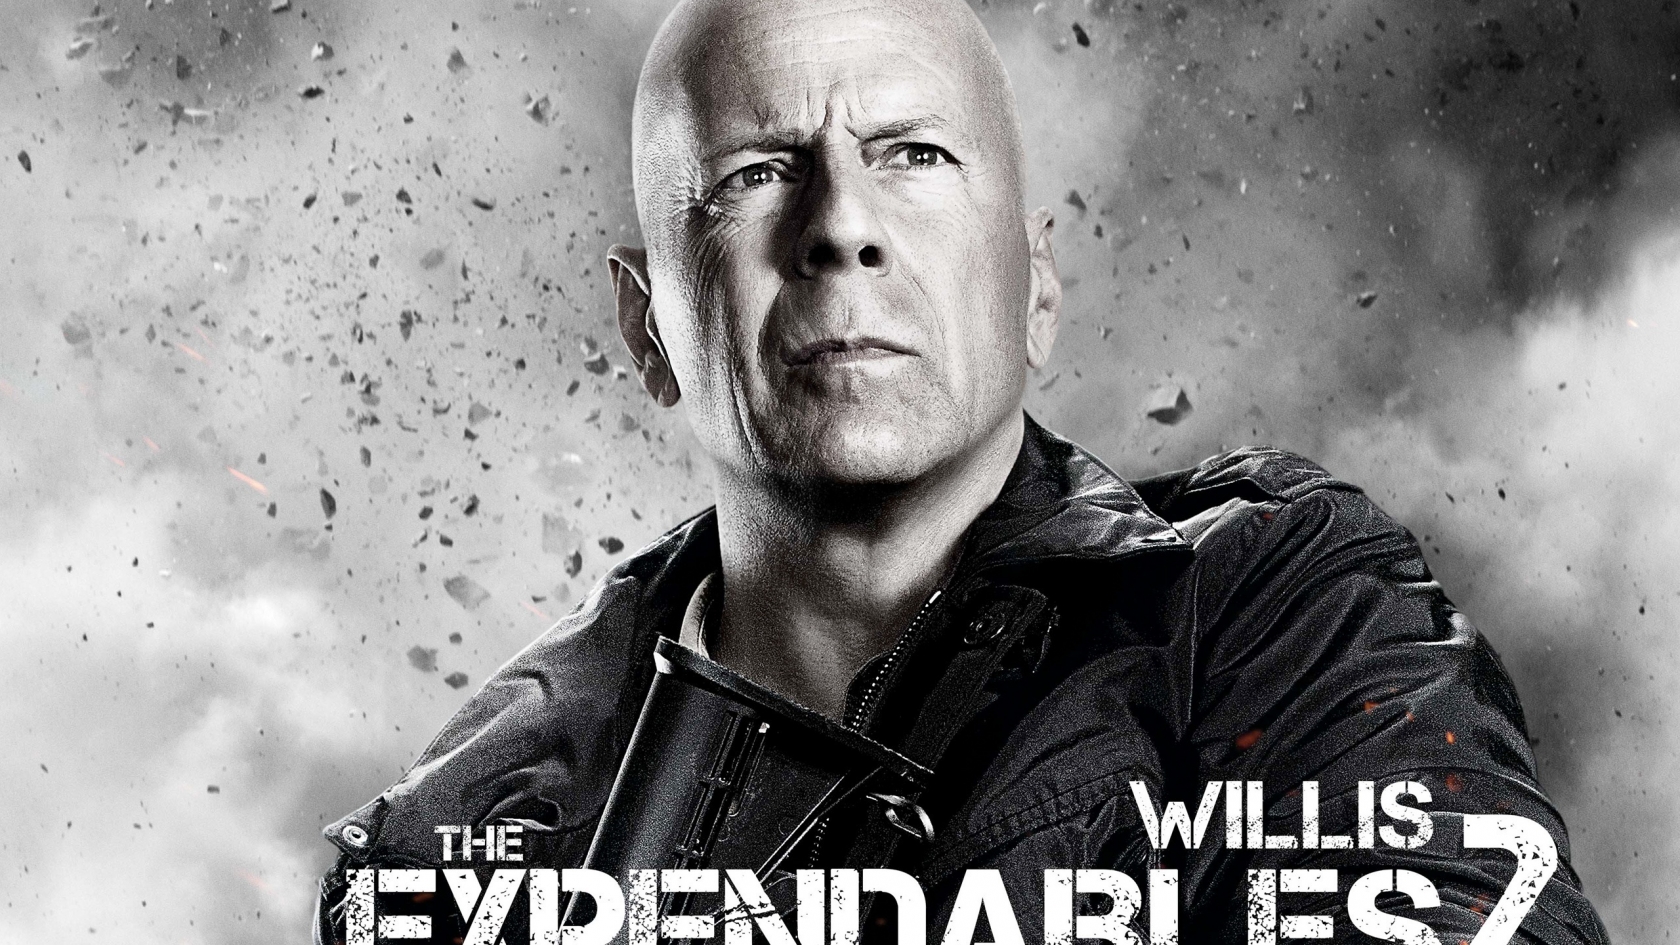 Bruce Willis Expendables 2 for 1680 x 945 HDTV resolution